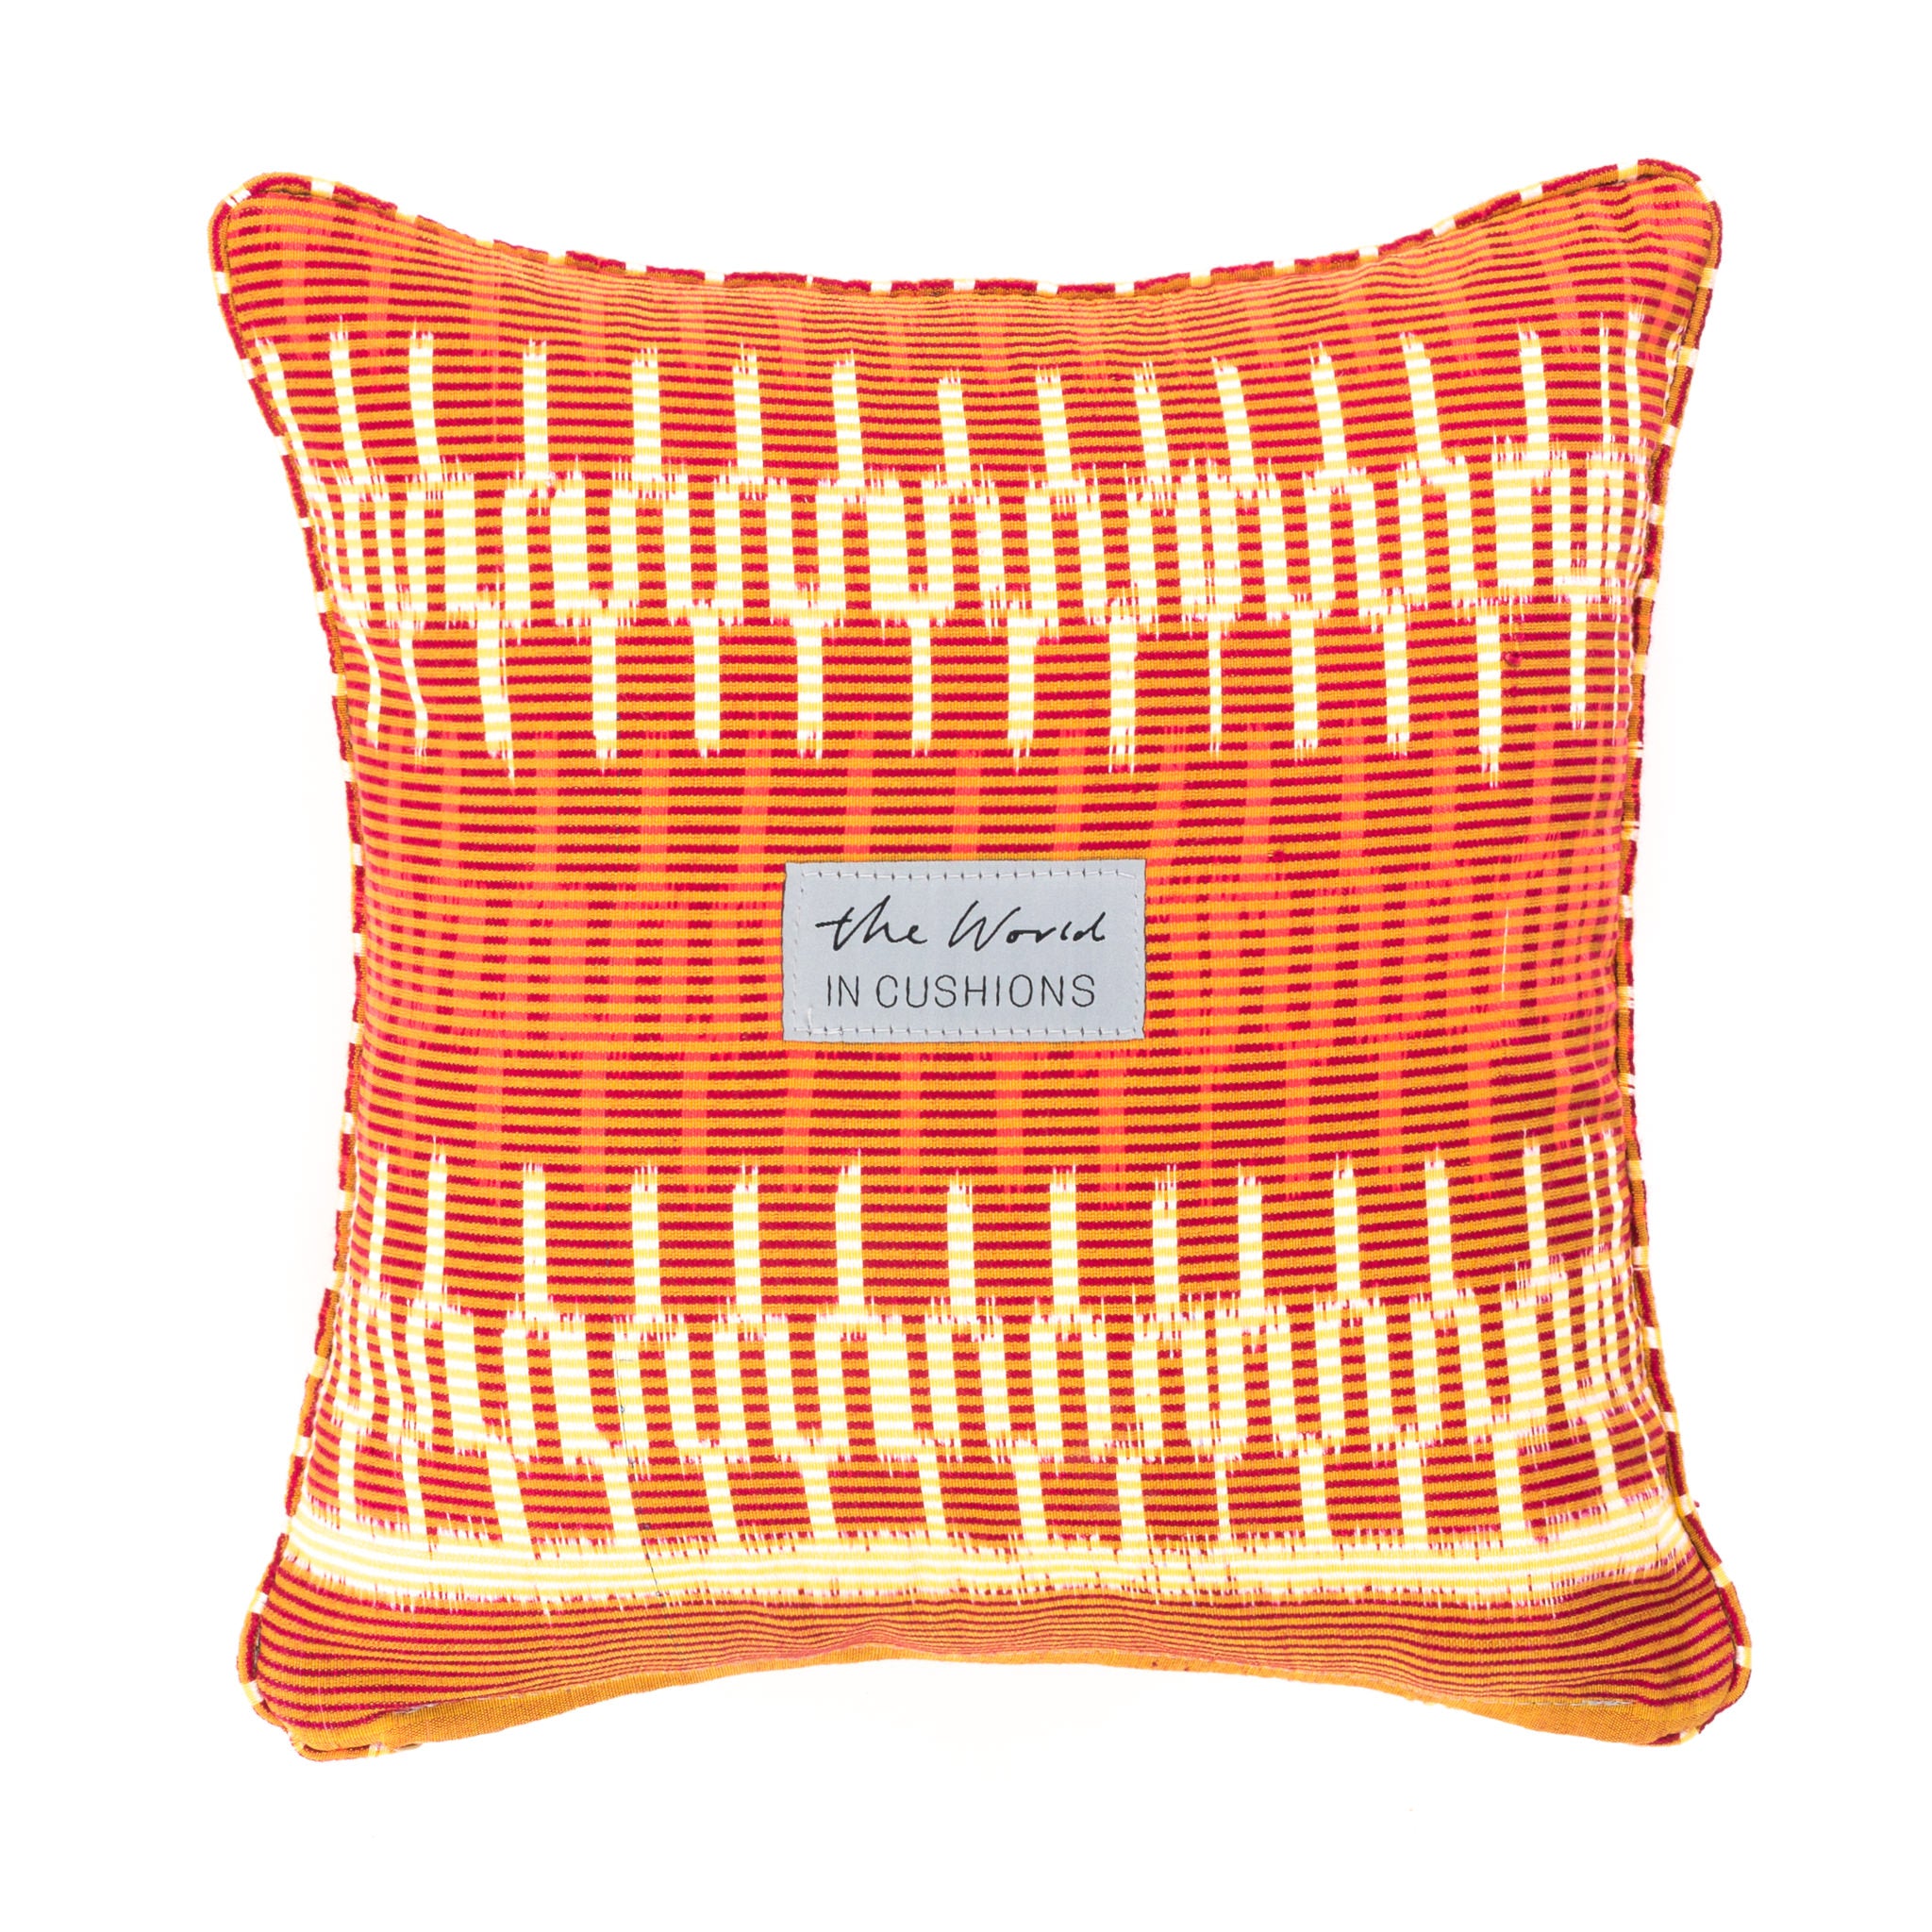 Orange and Cream Patterned Ikat Square Scatter Cushion from Bali, Indonesia- BACK